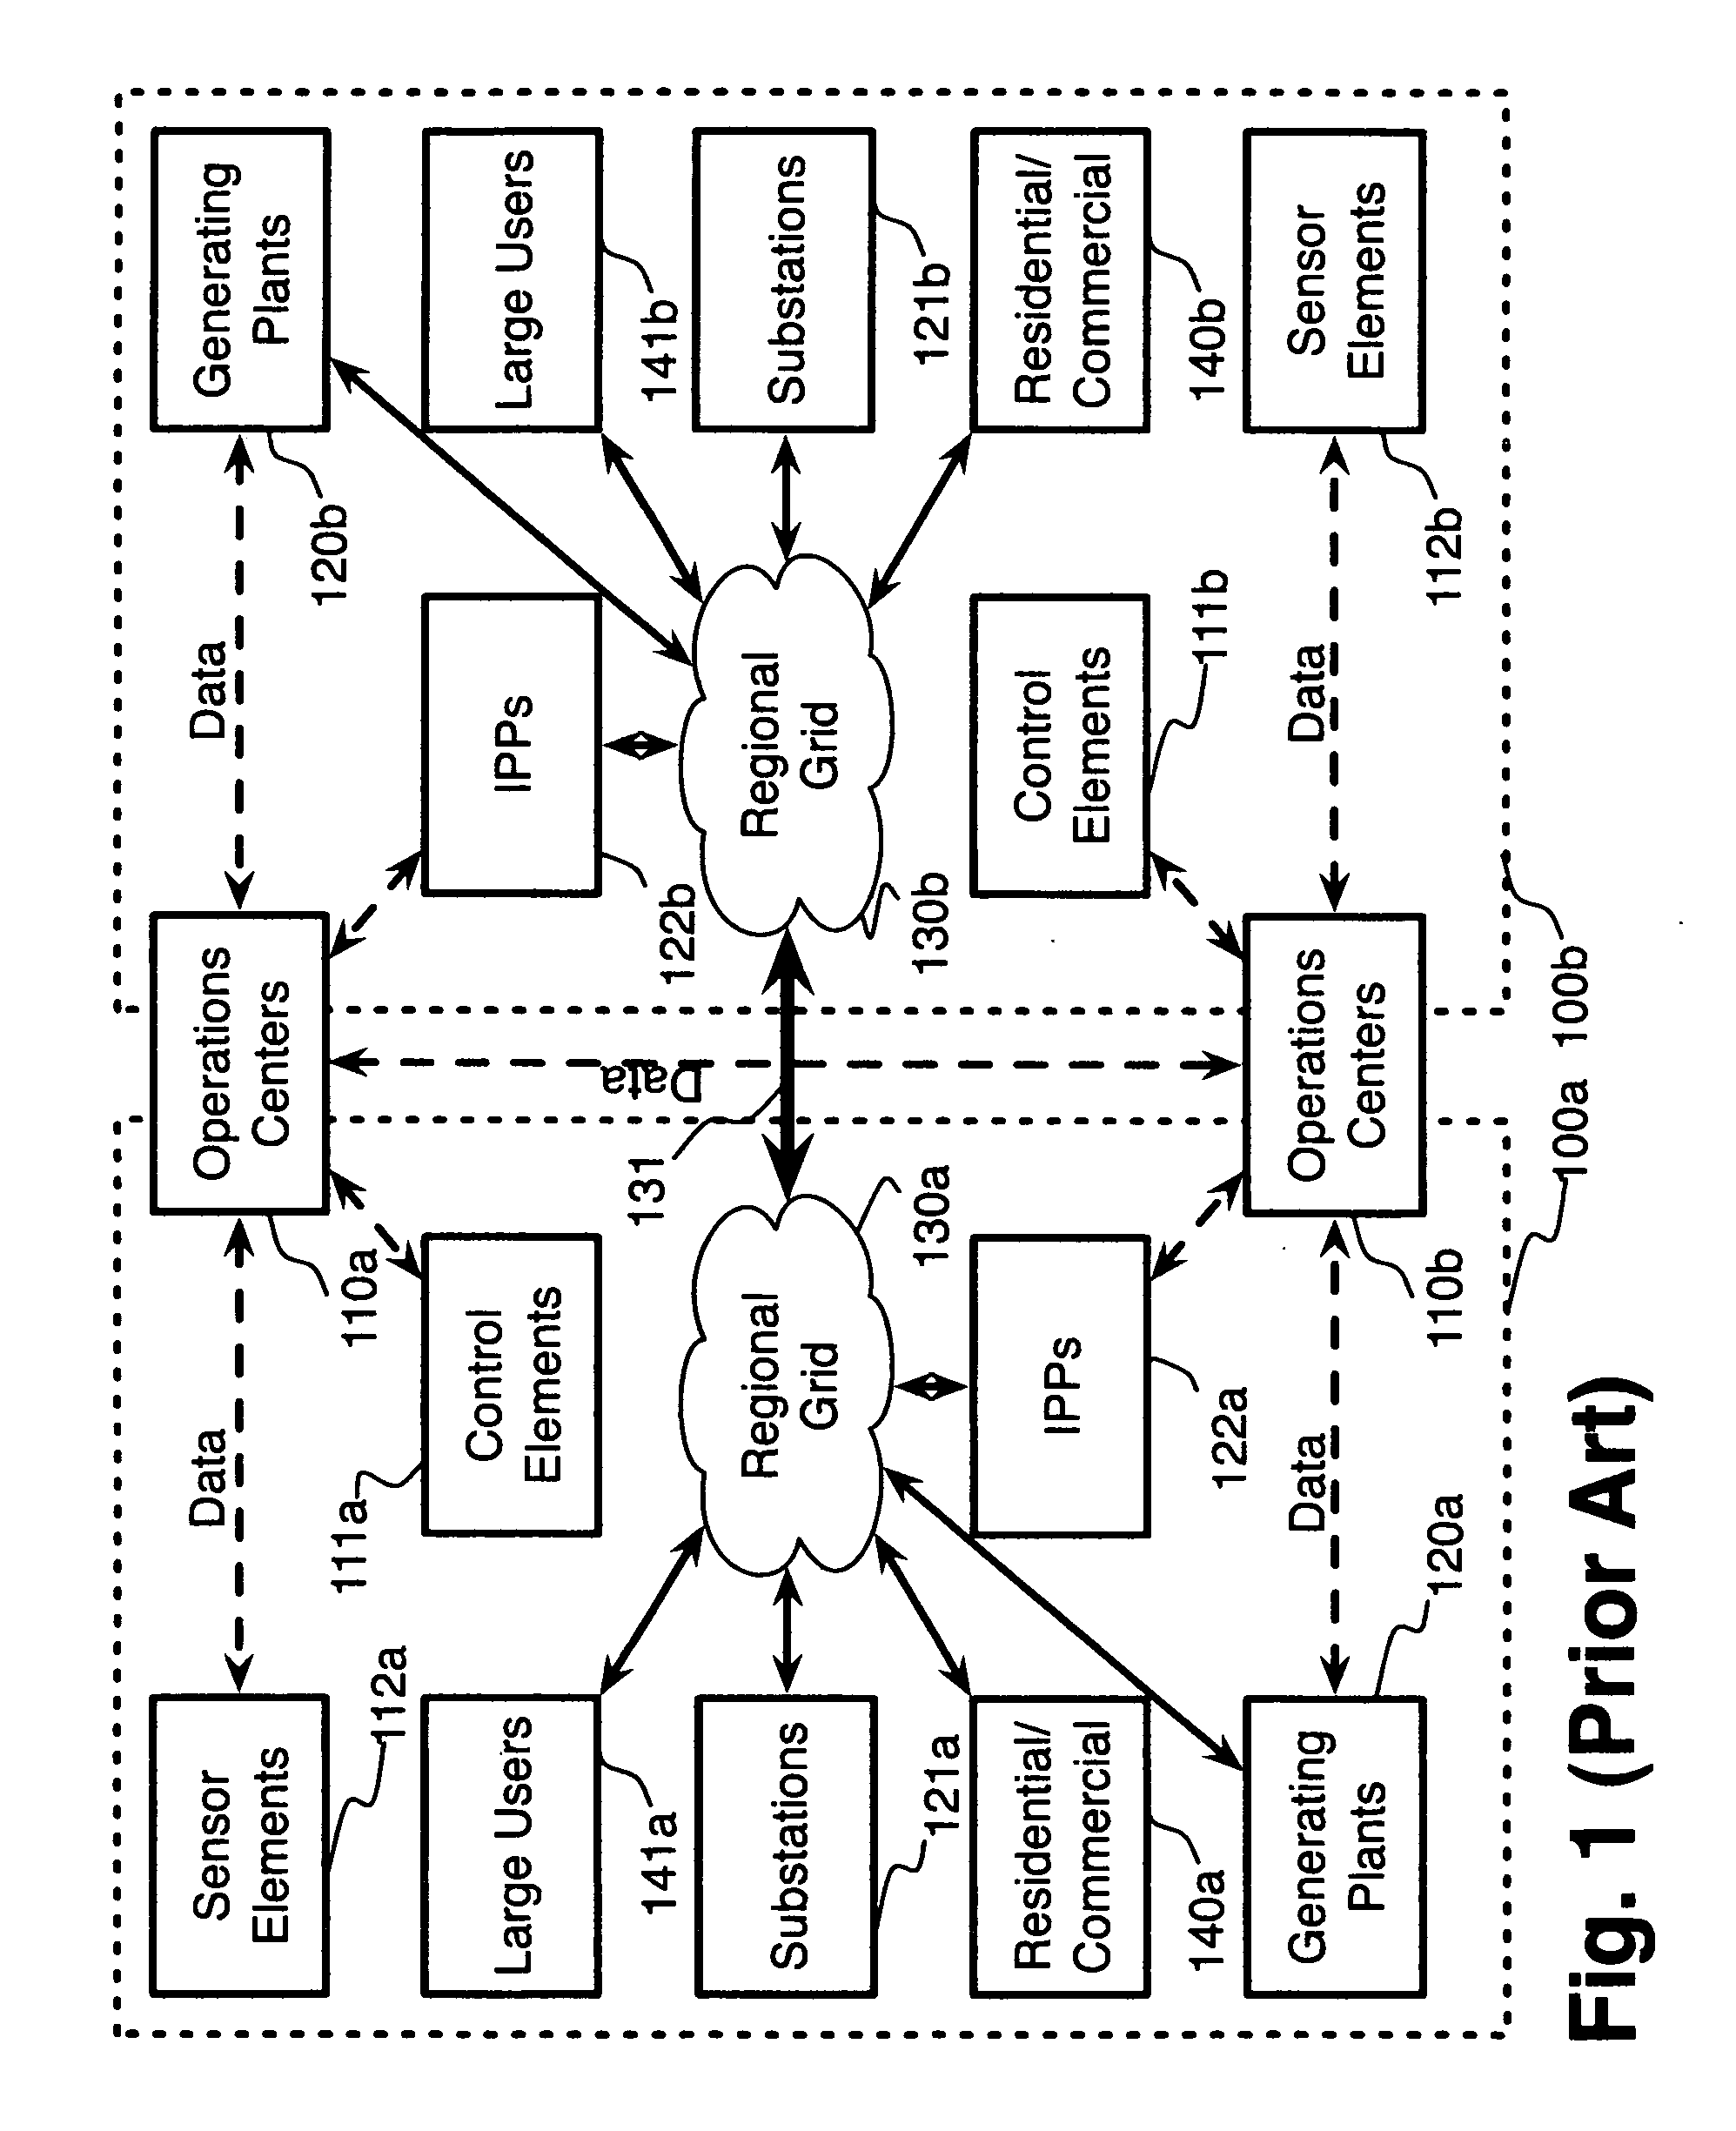 Dynamic pricing system and method for complex energy securities